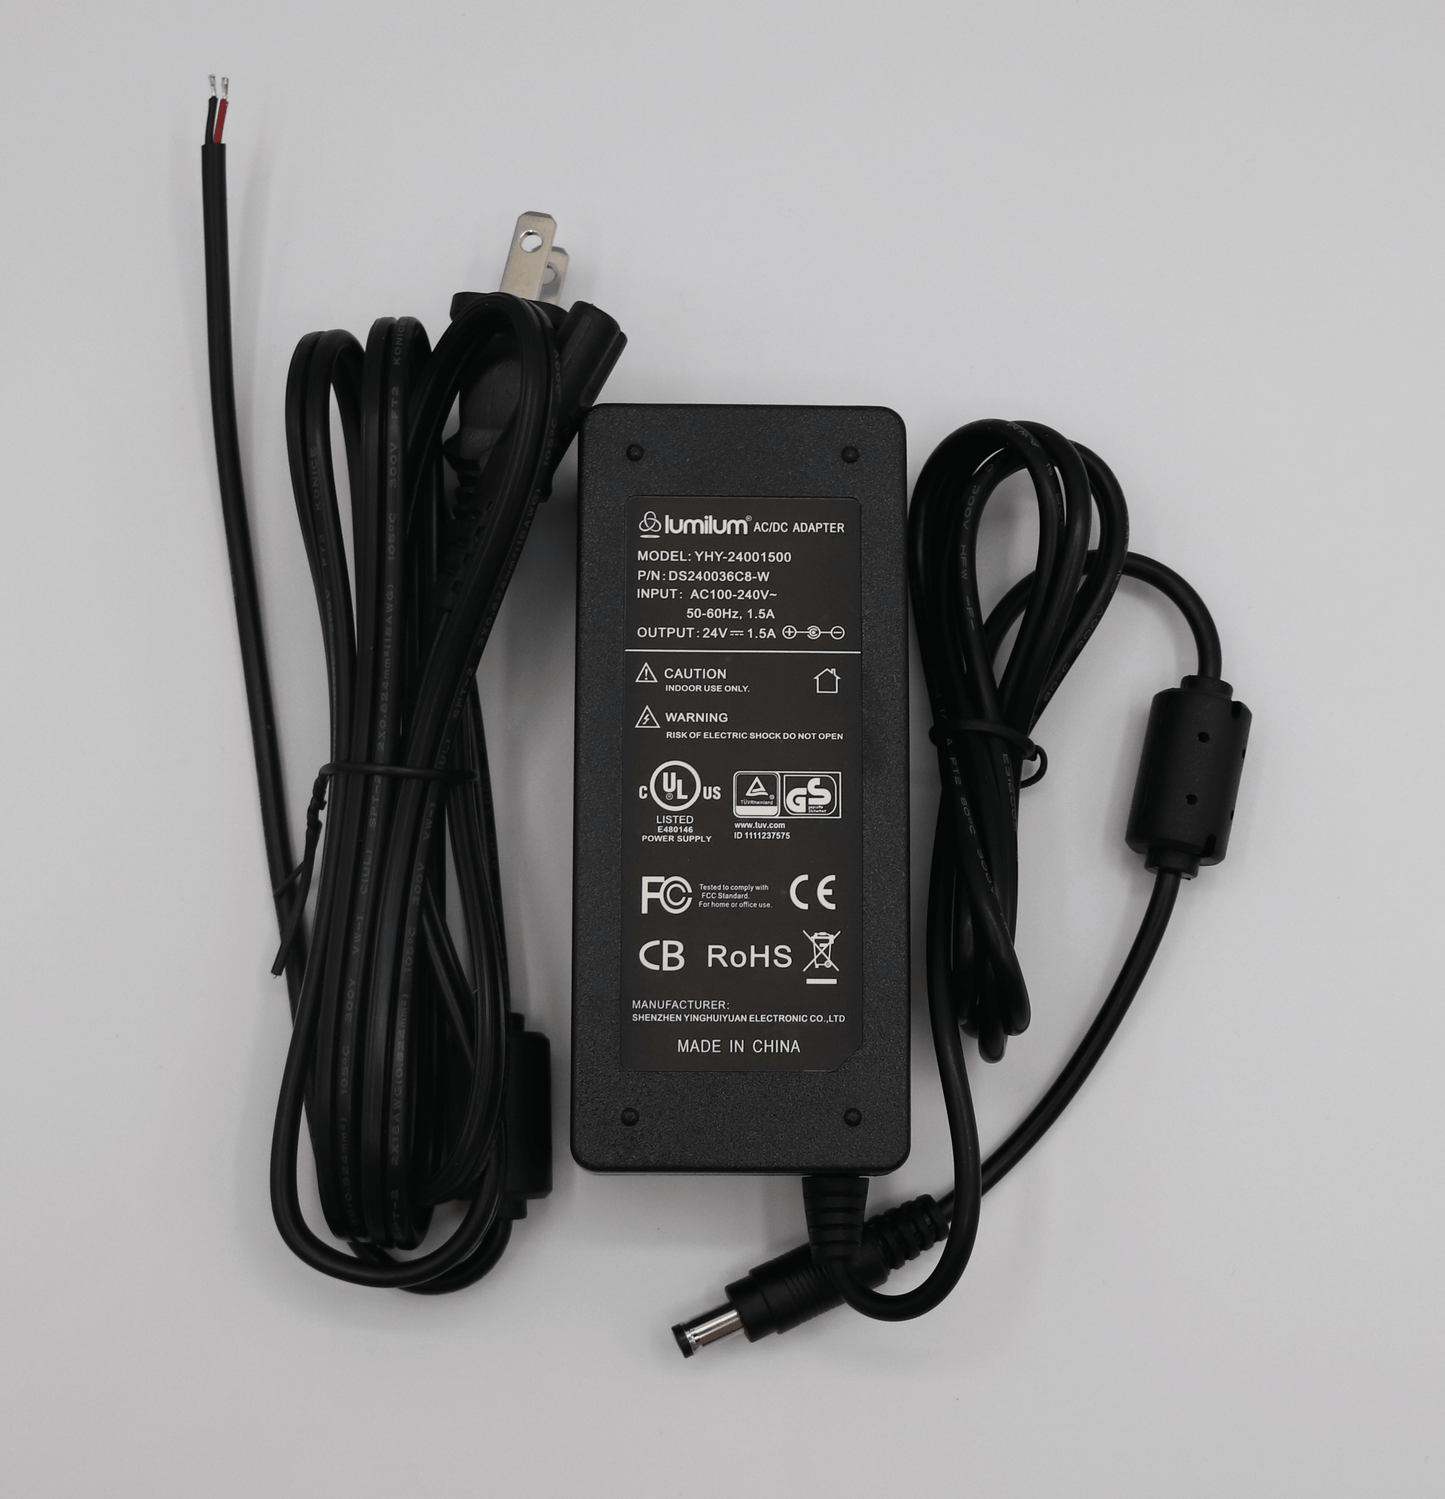 black 36 watt led light adapter with cables